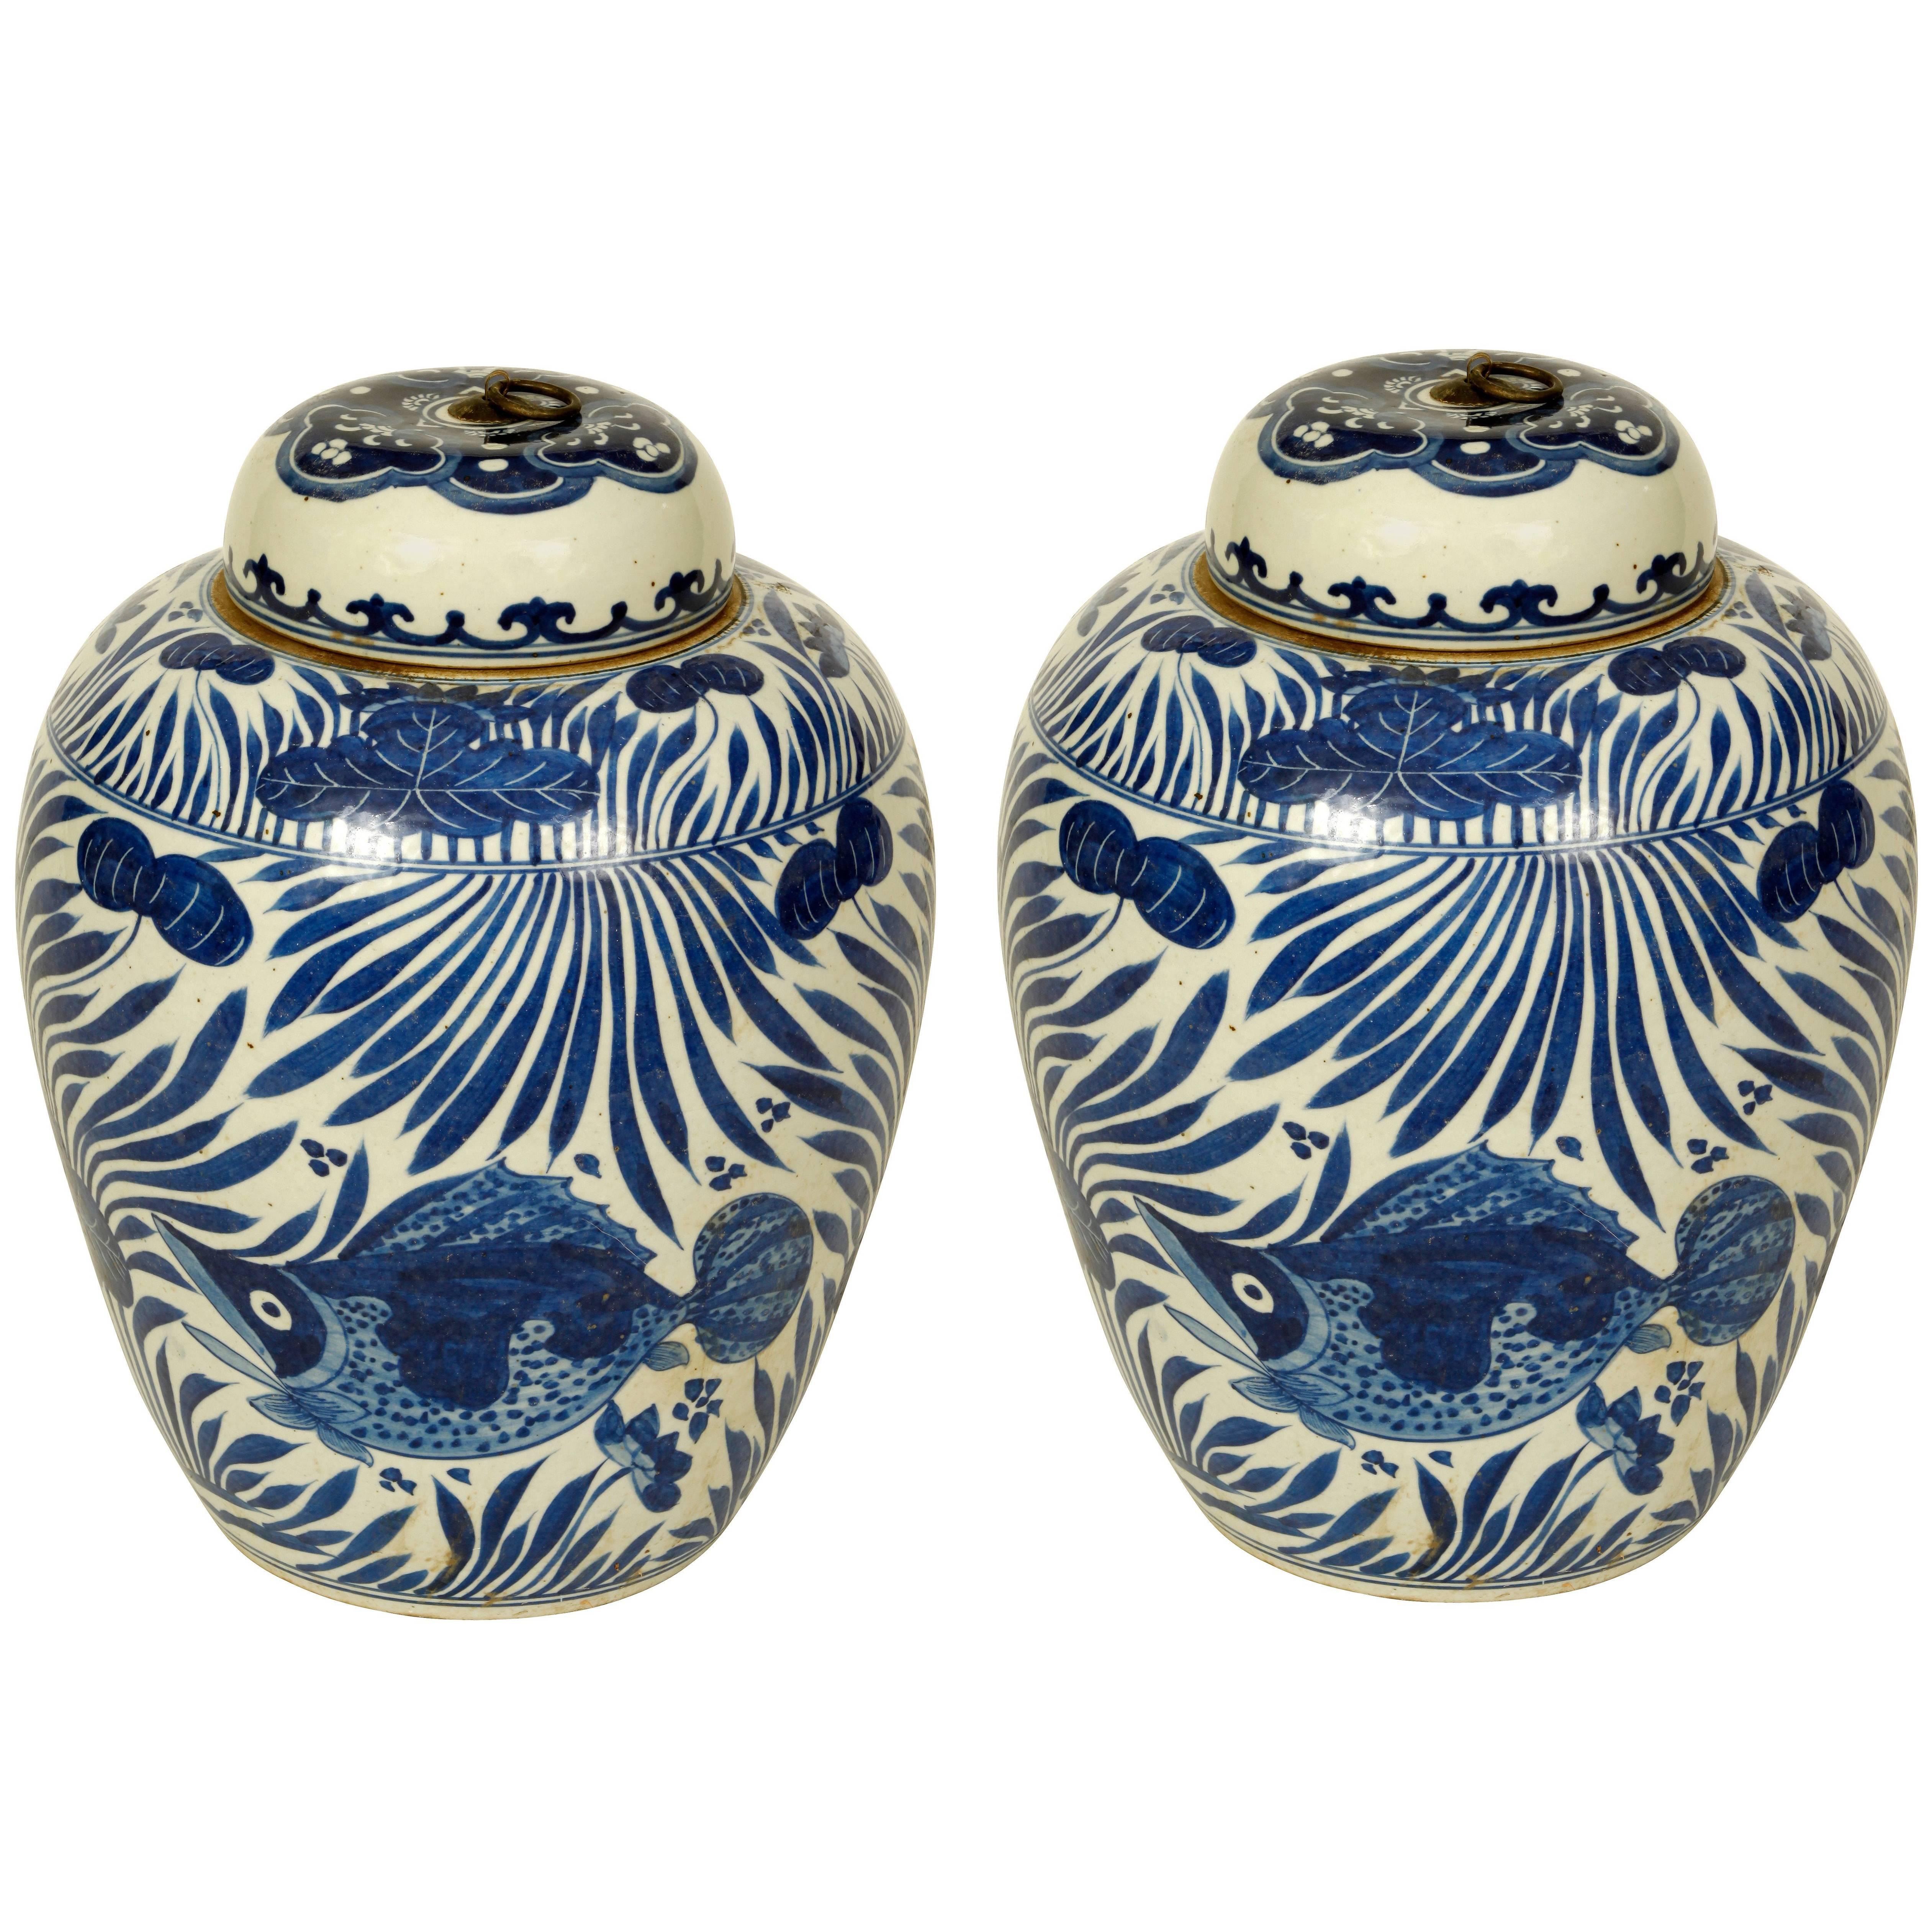 Pair of Export Chinese Jars with Lids